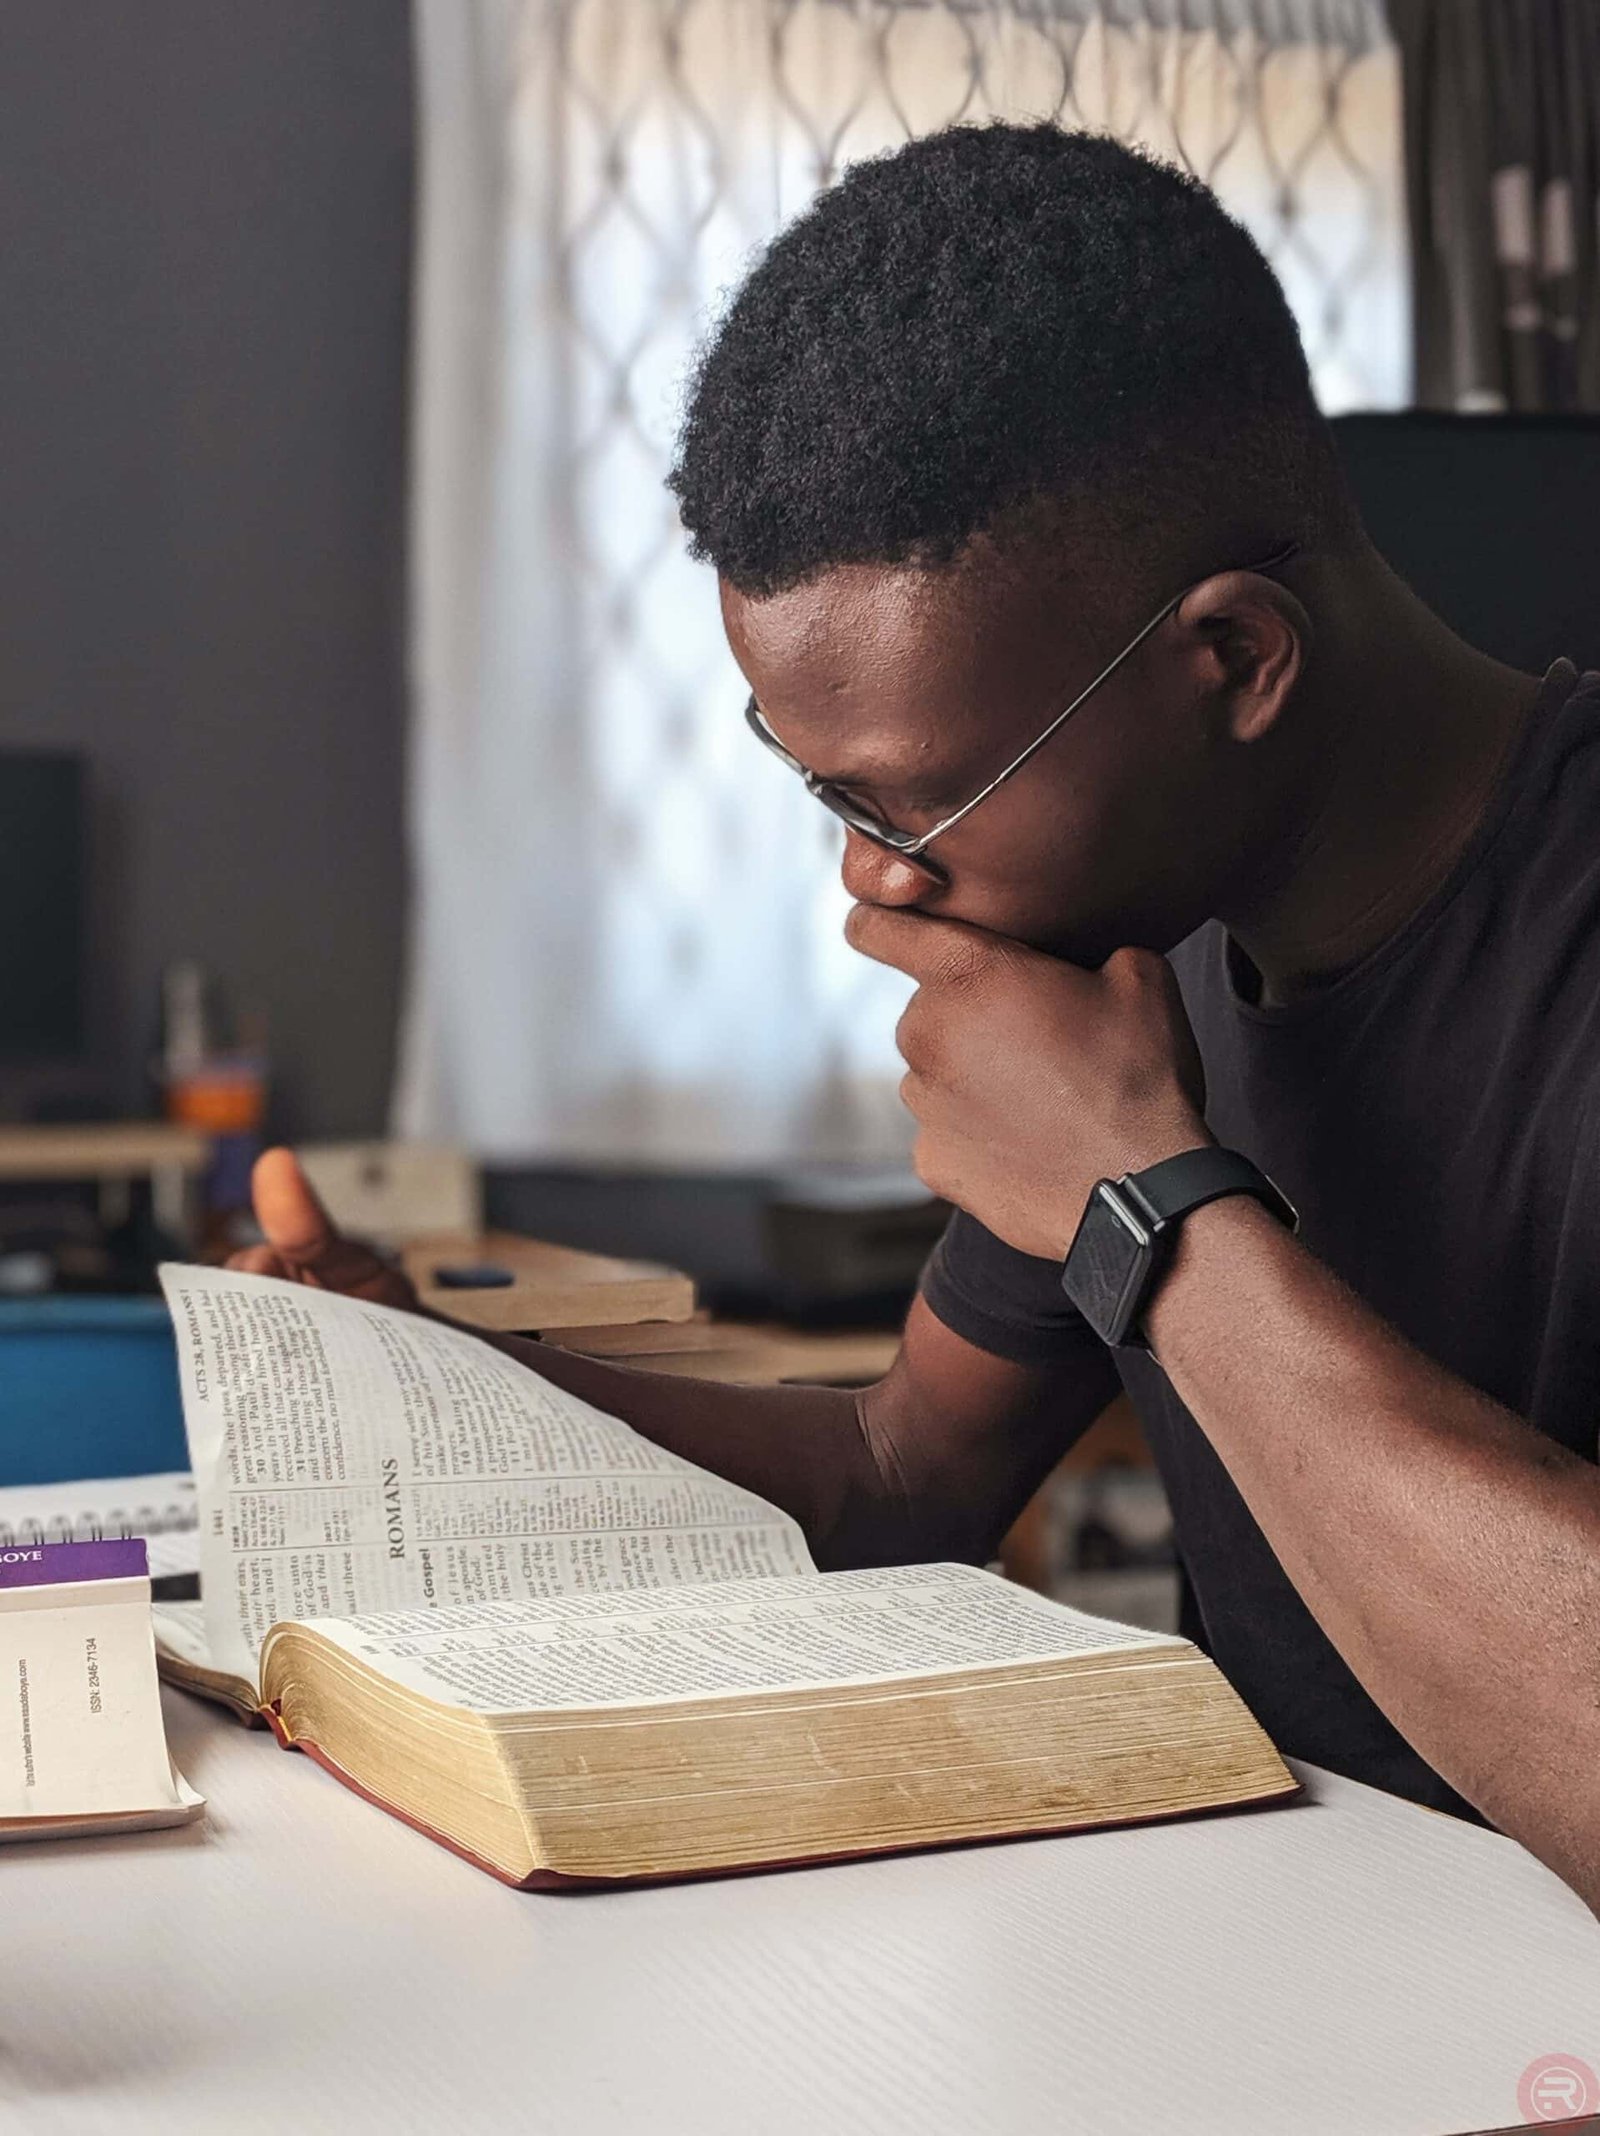 You must be a bible student to be a Gospel music minister